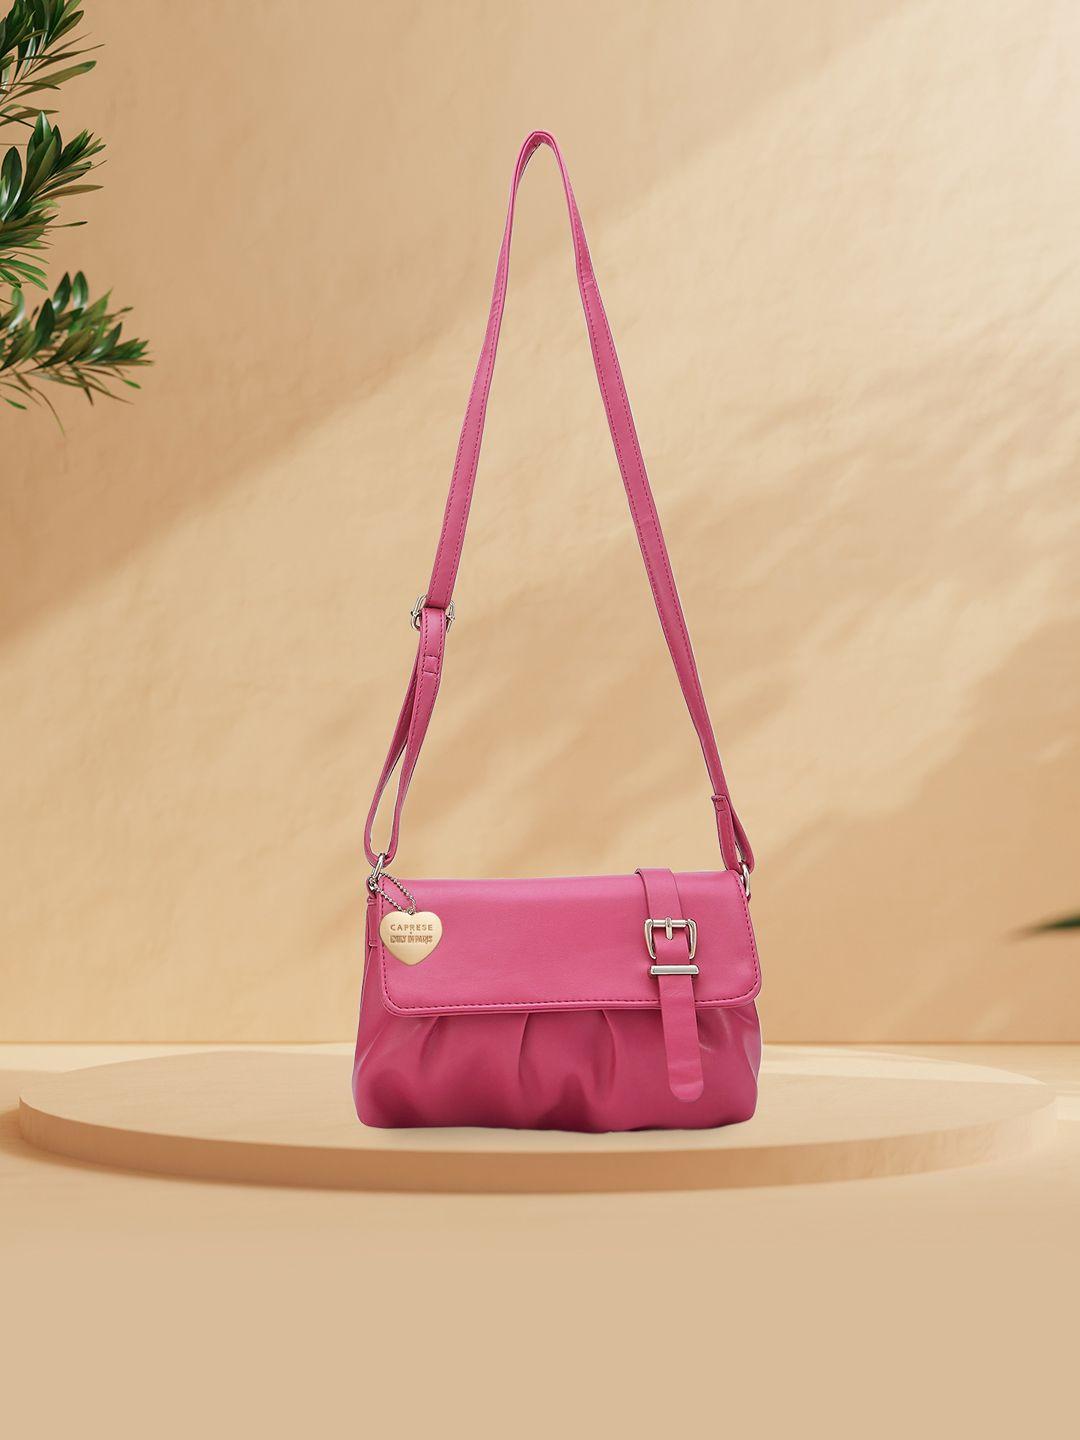 caprese emily in paris small structured sling bag